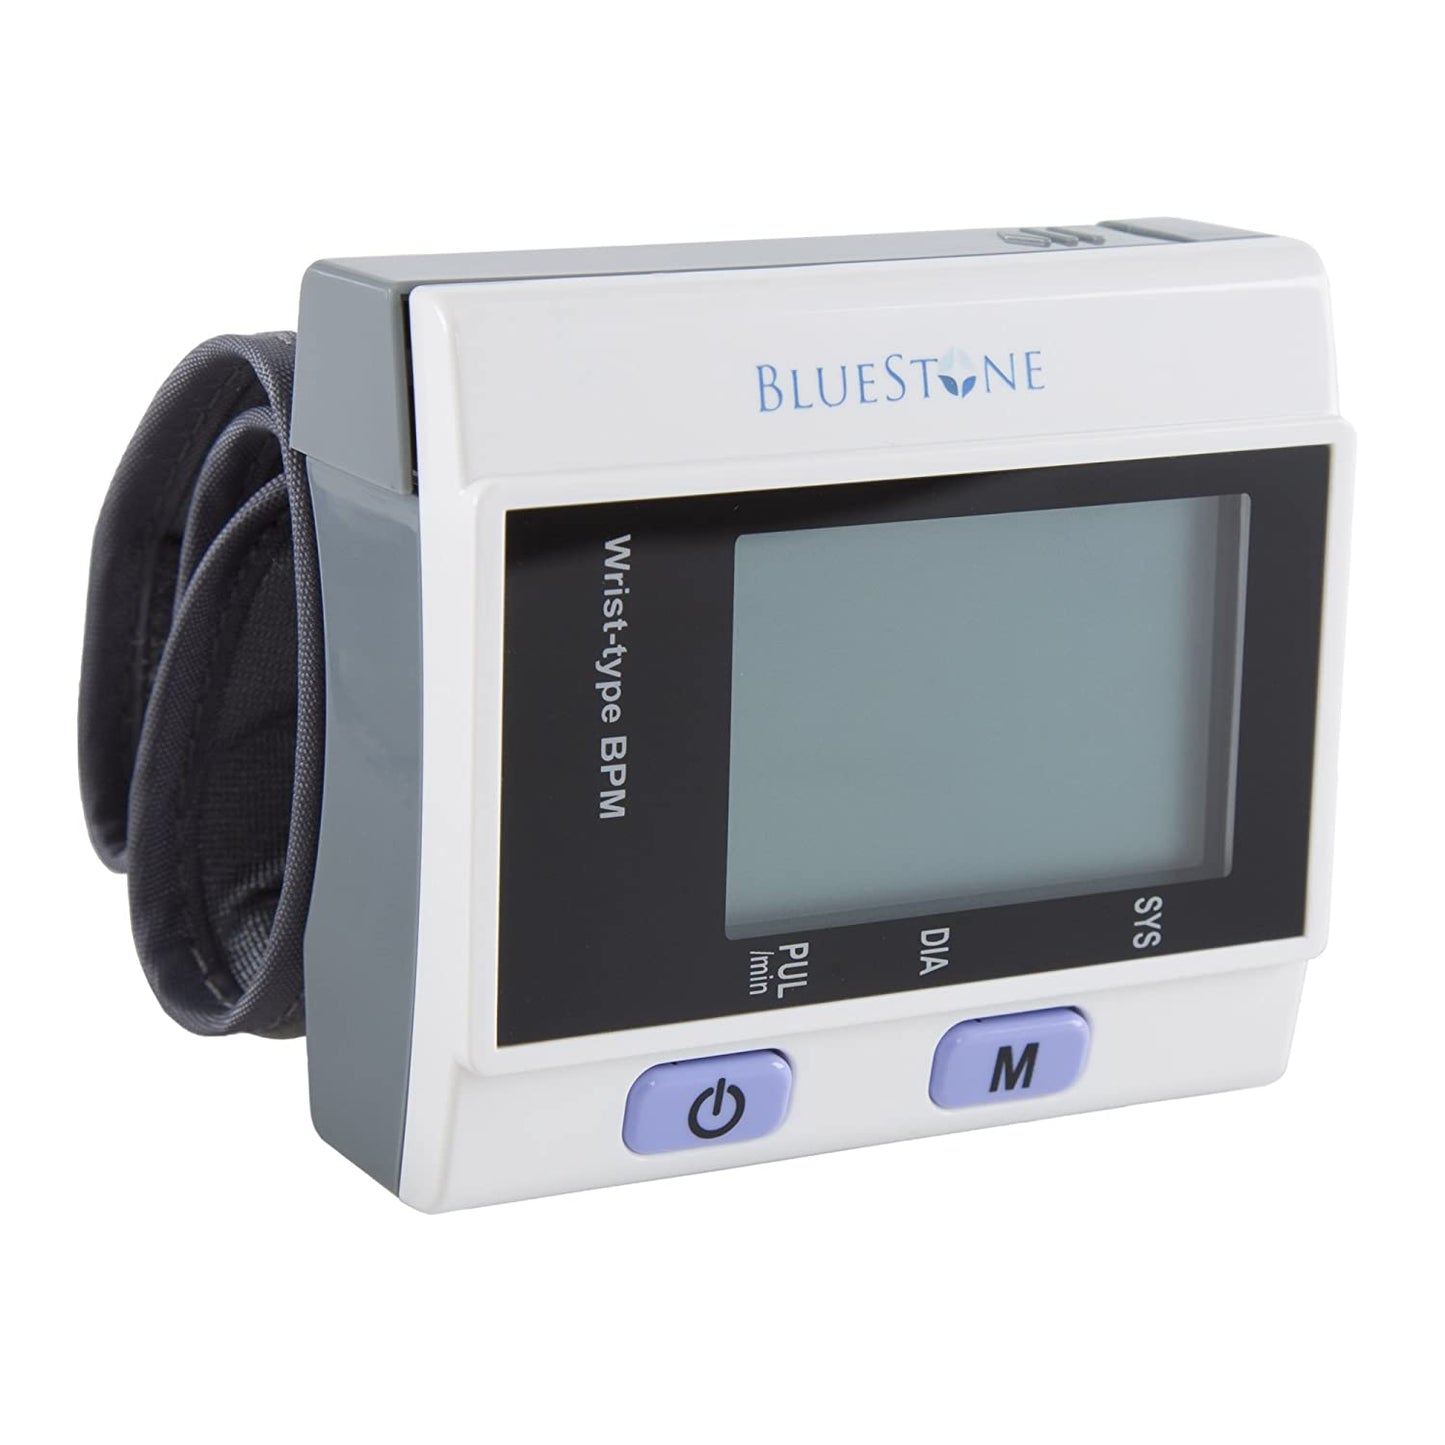 Automatic Wrist Blood Pressure Monitor with Digital LCD Display Screen- Fast BP and Pulse Monitoring and Adjustable Wrist Cuff by Bluestone